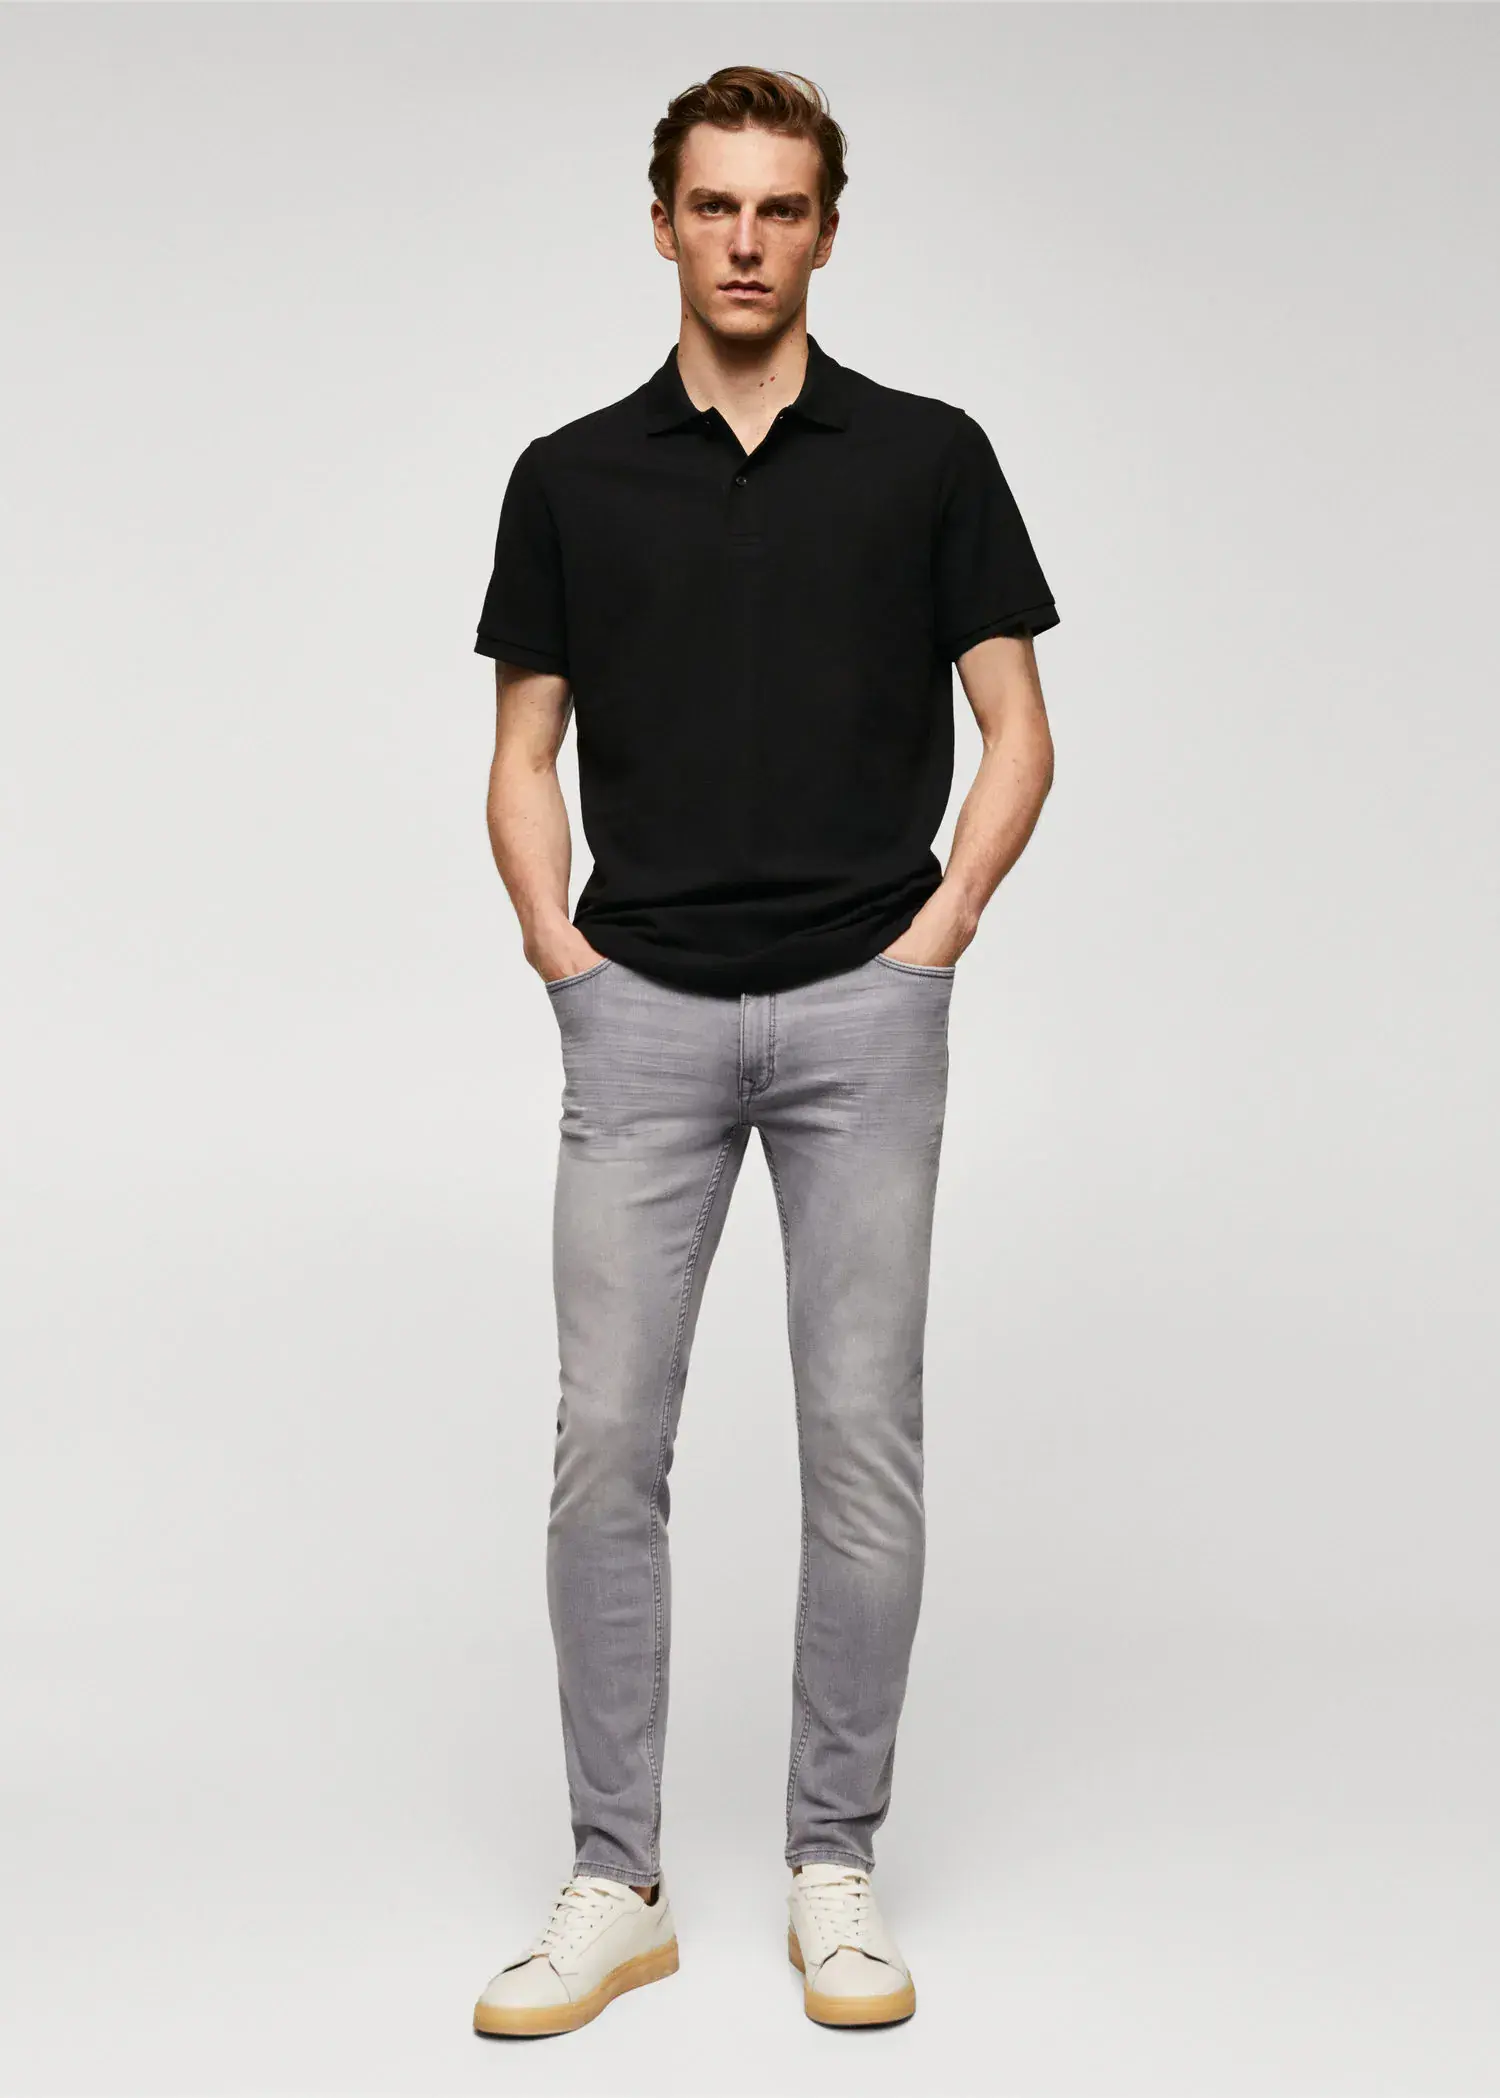 Mango Jude skinny-fit jeans. a man in a black shirt and gray pants. 